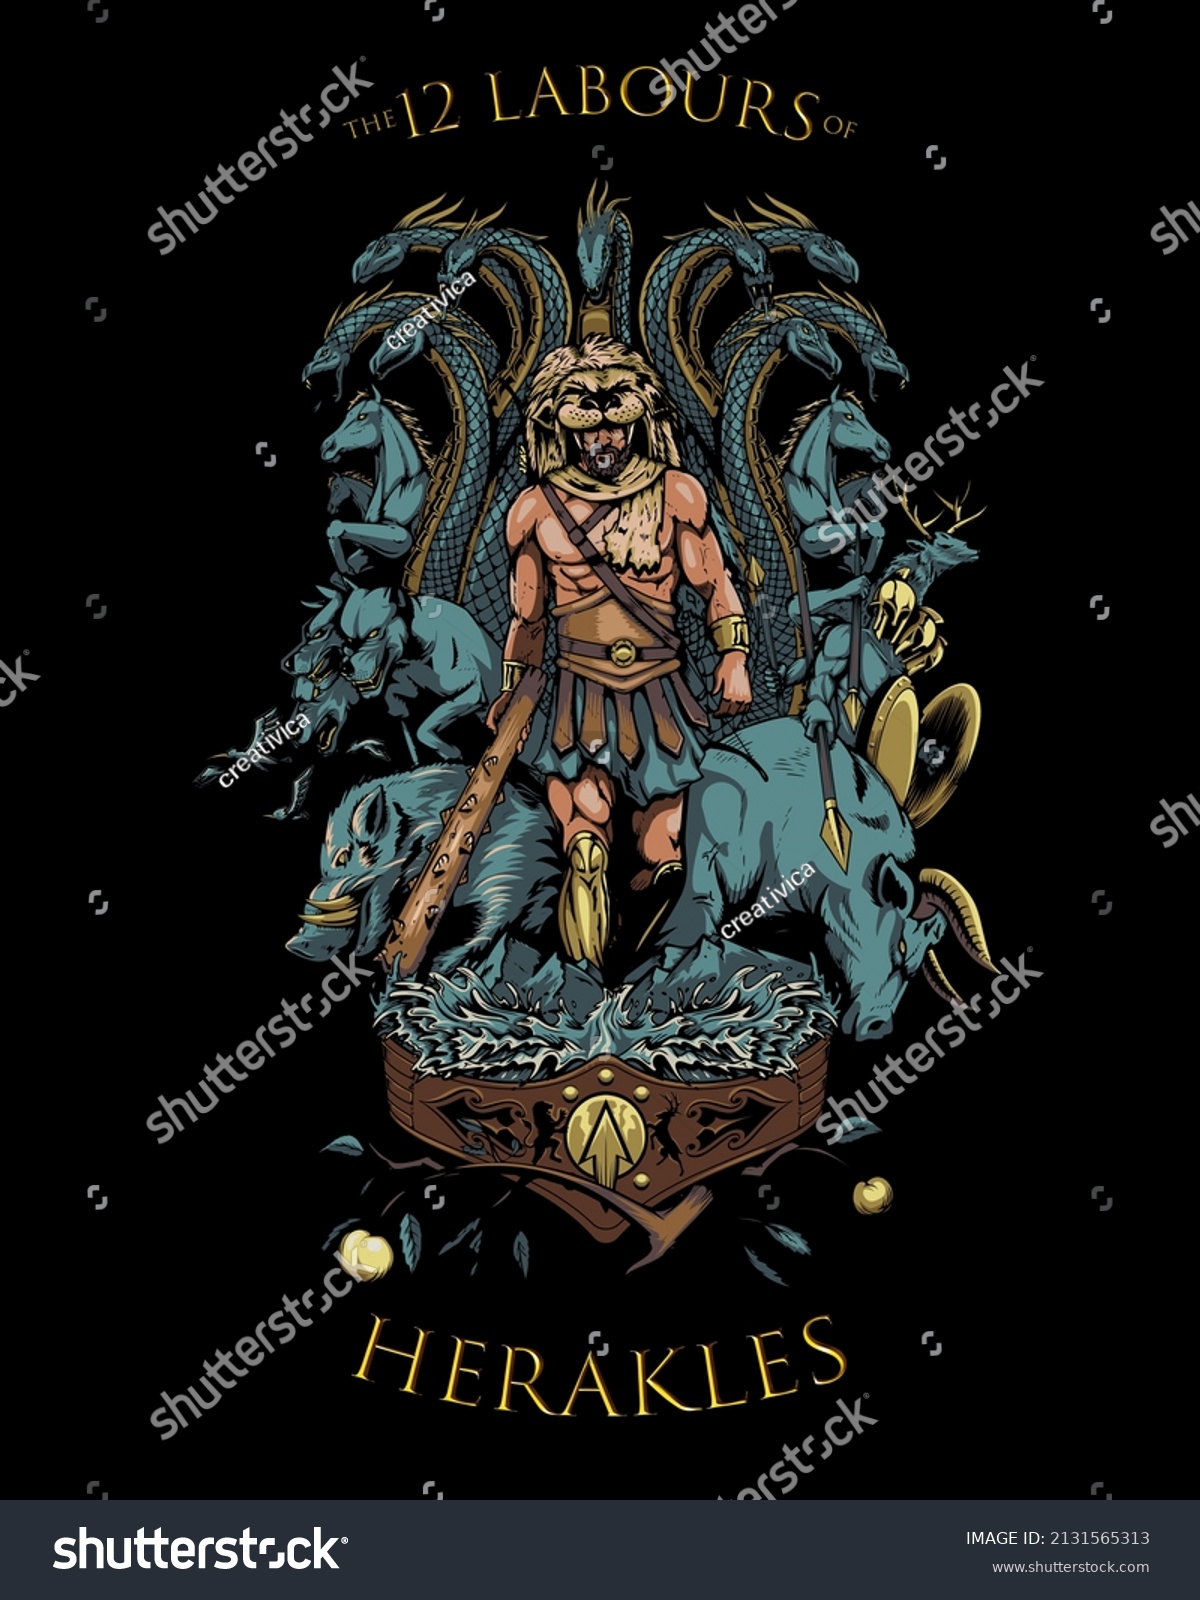 SVG of the 12 Labours of Herakles vector illustration in tattoo art style, that this also can be a tattoo art, poster thirt print or any other purpose. svg